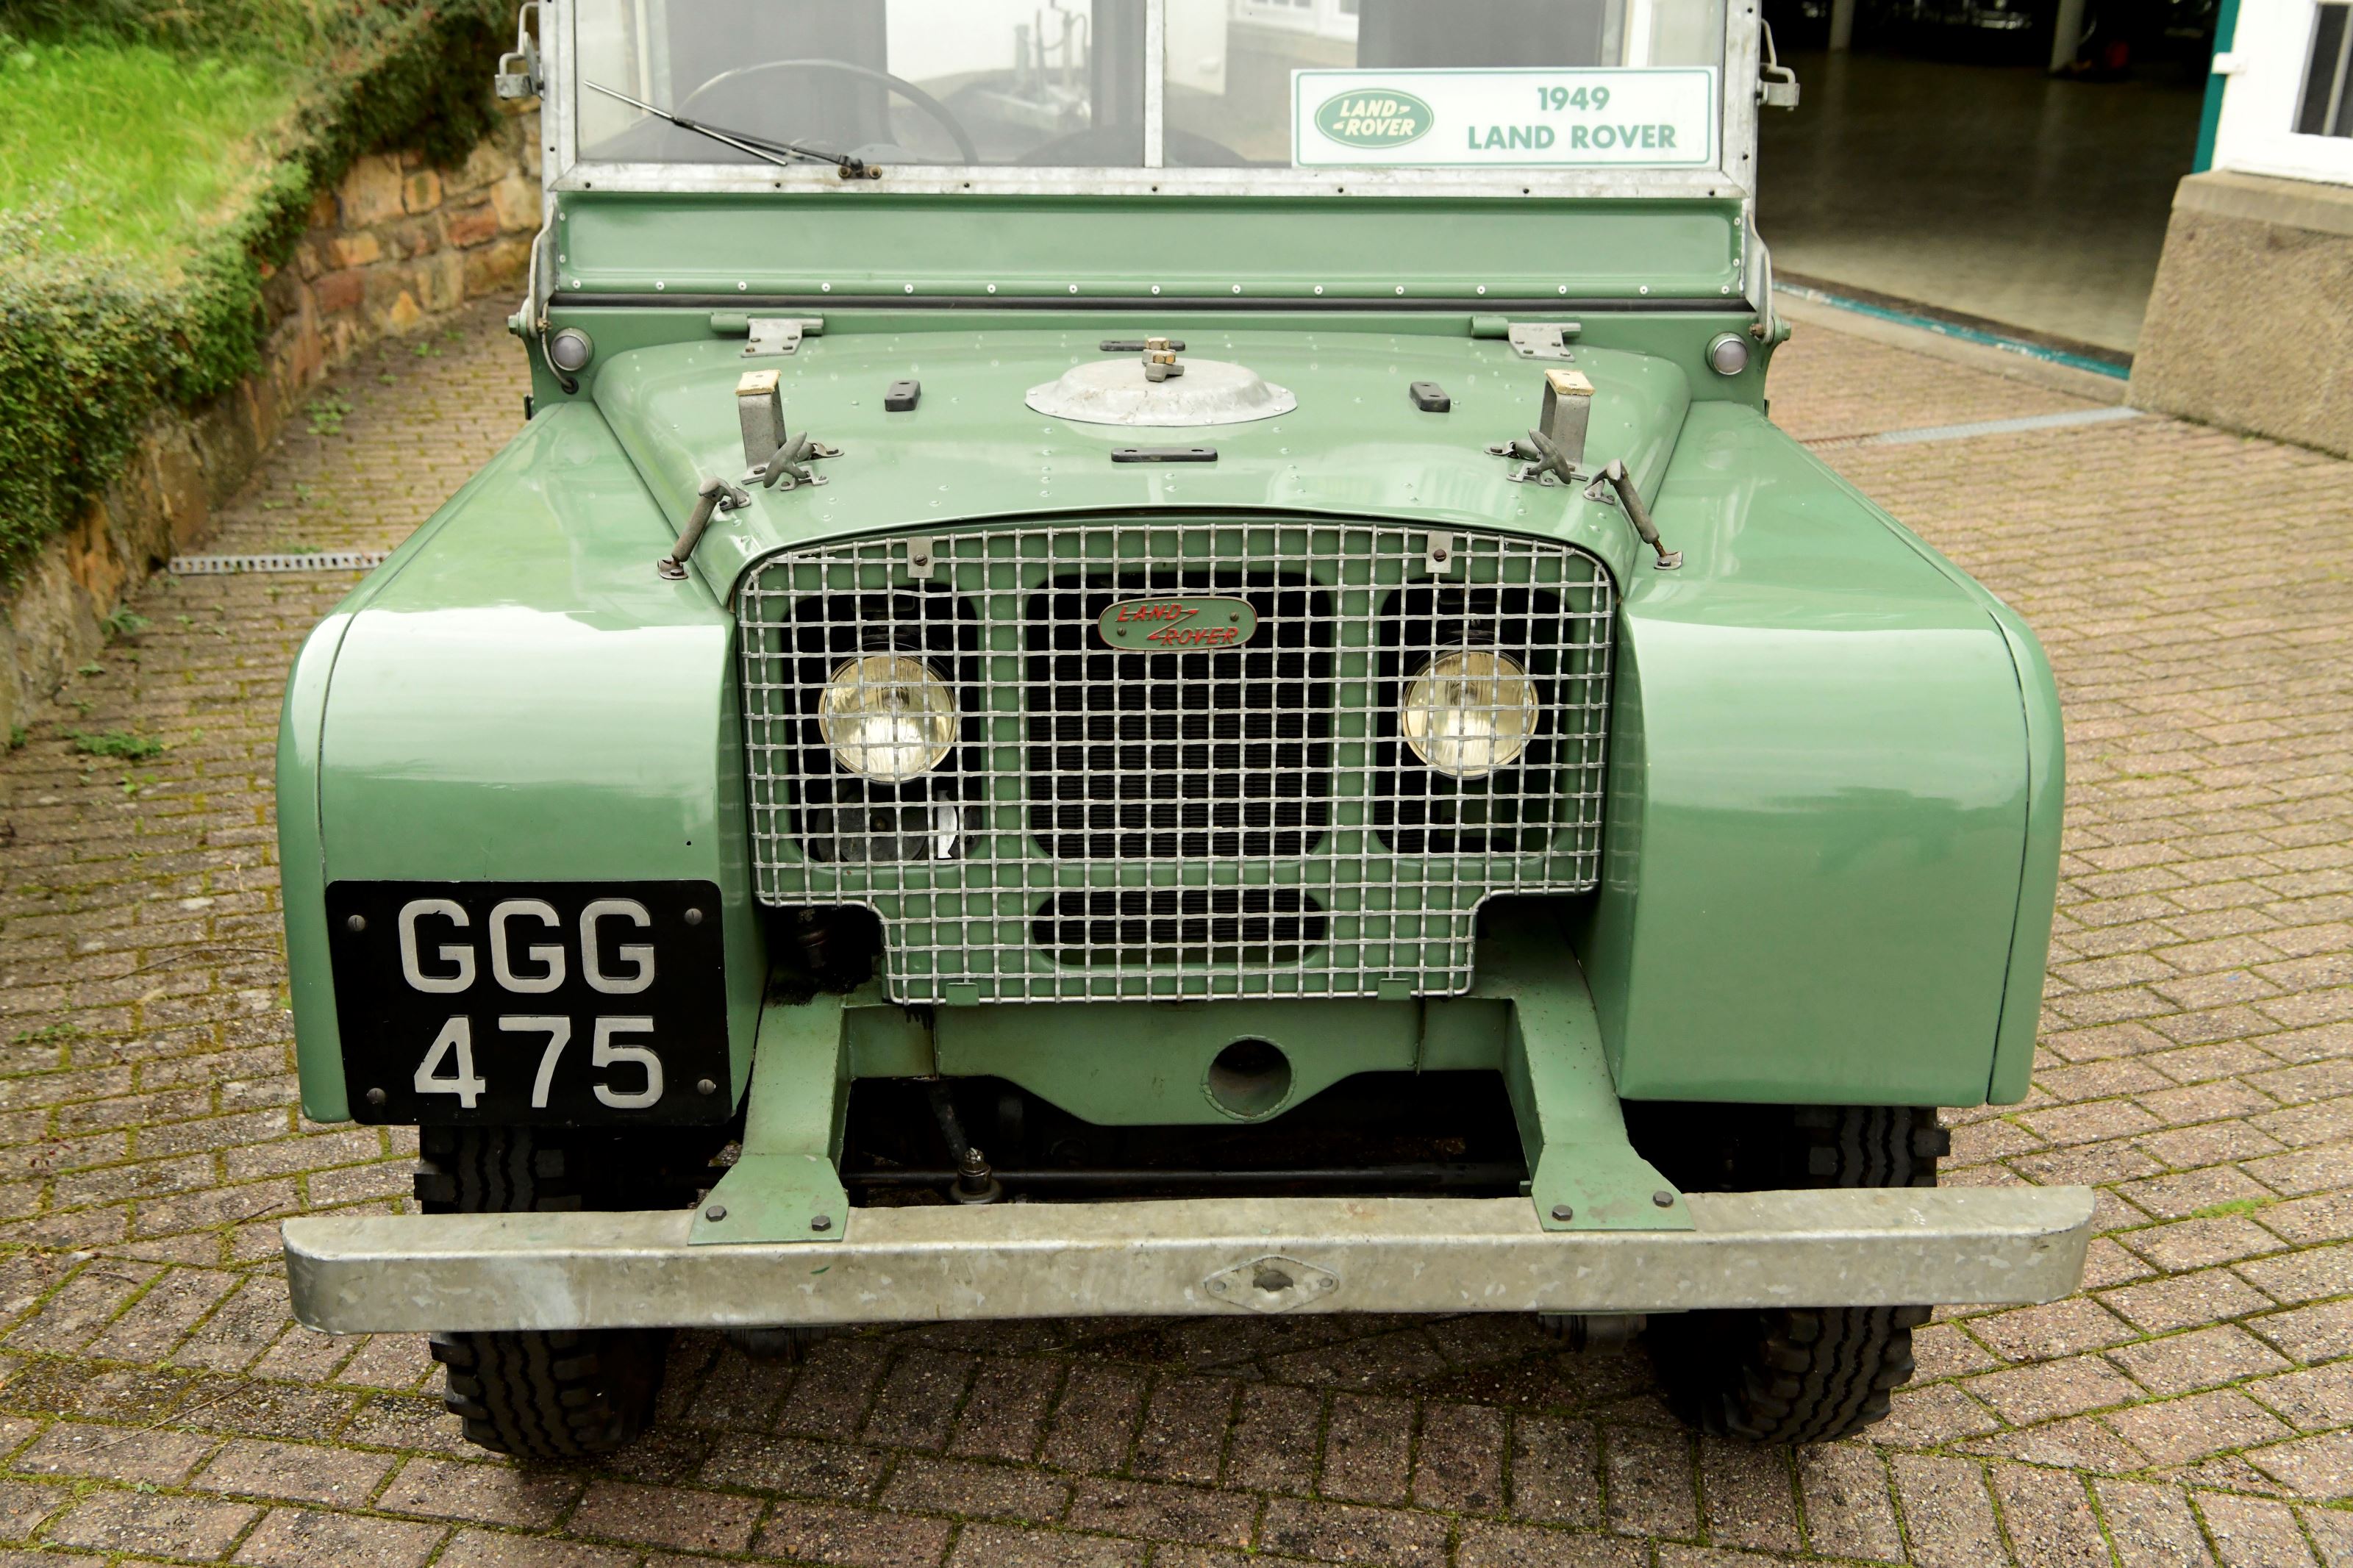 Land rover series 1 swb with hard top nyikpze9a2ig92gpvtf5o